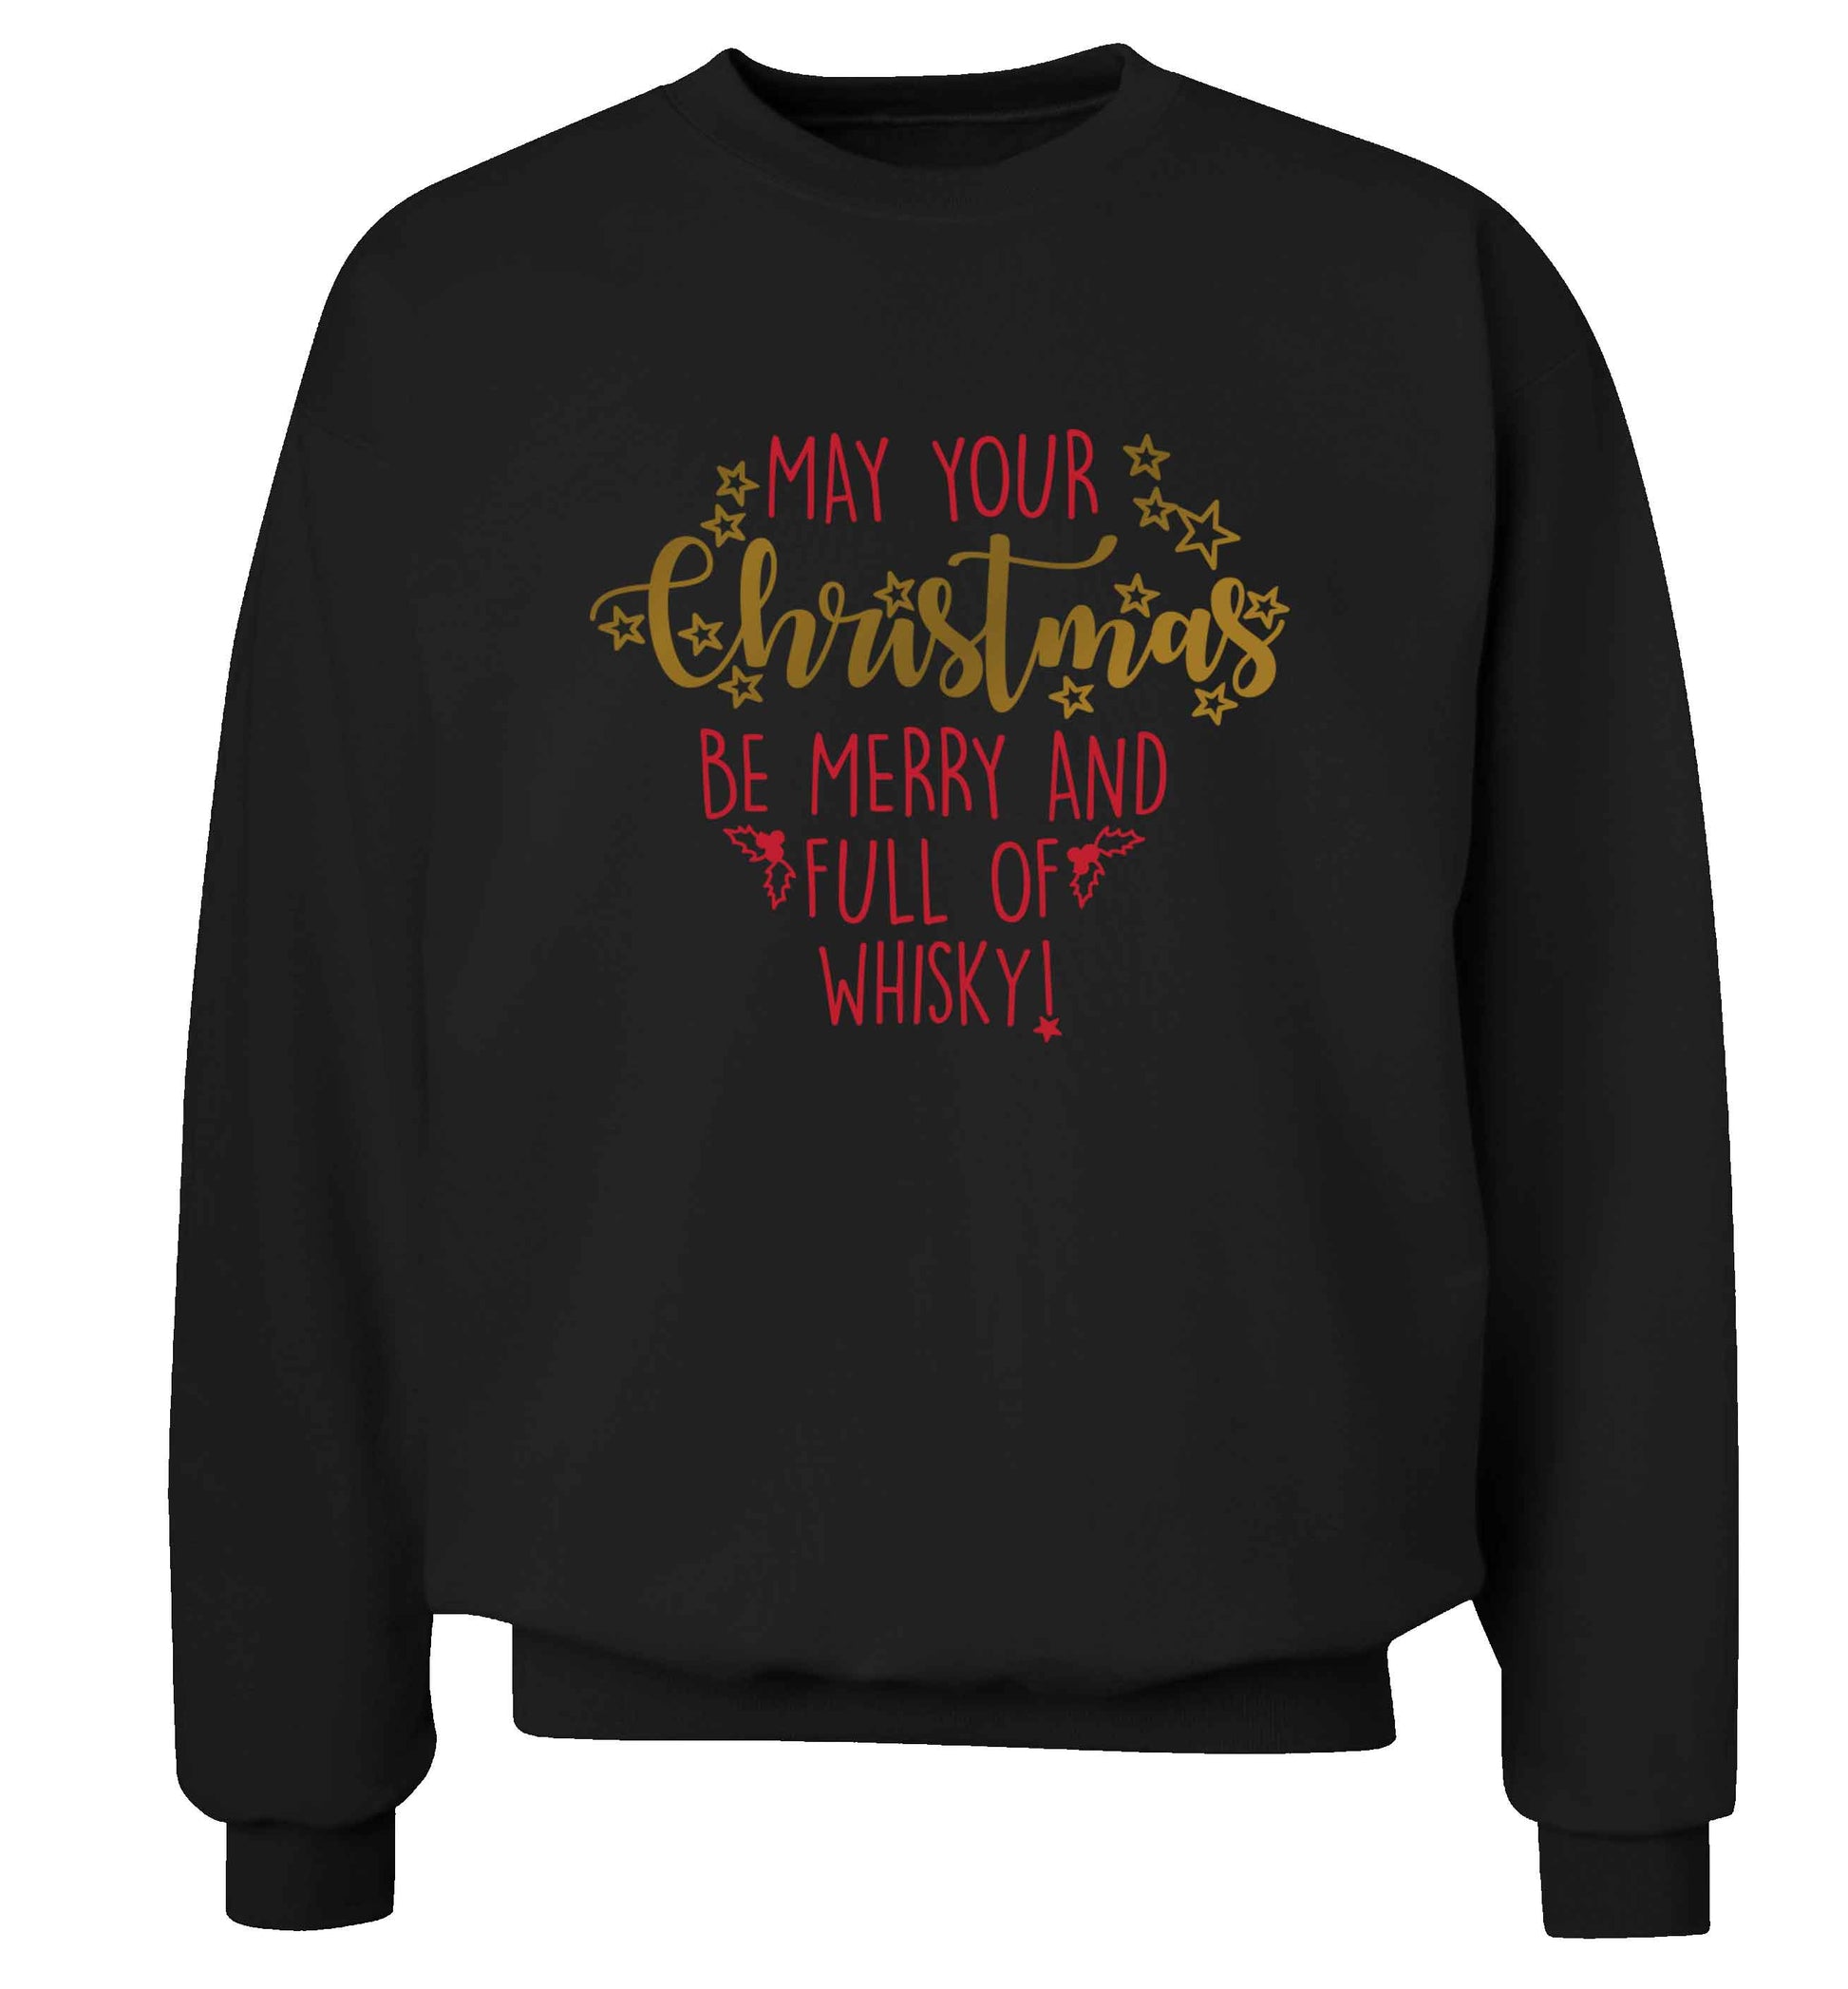 May your Christmas be merry and full of whisky Adult's unisex black Sweater 2XL